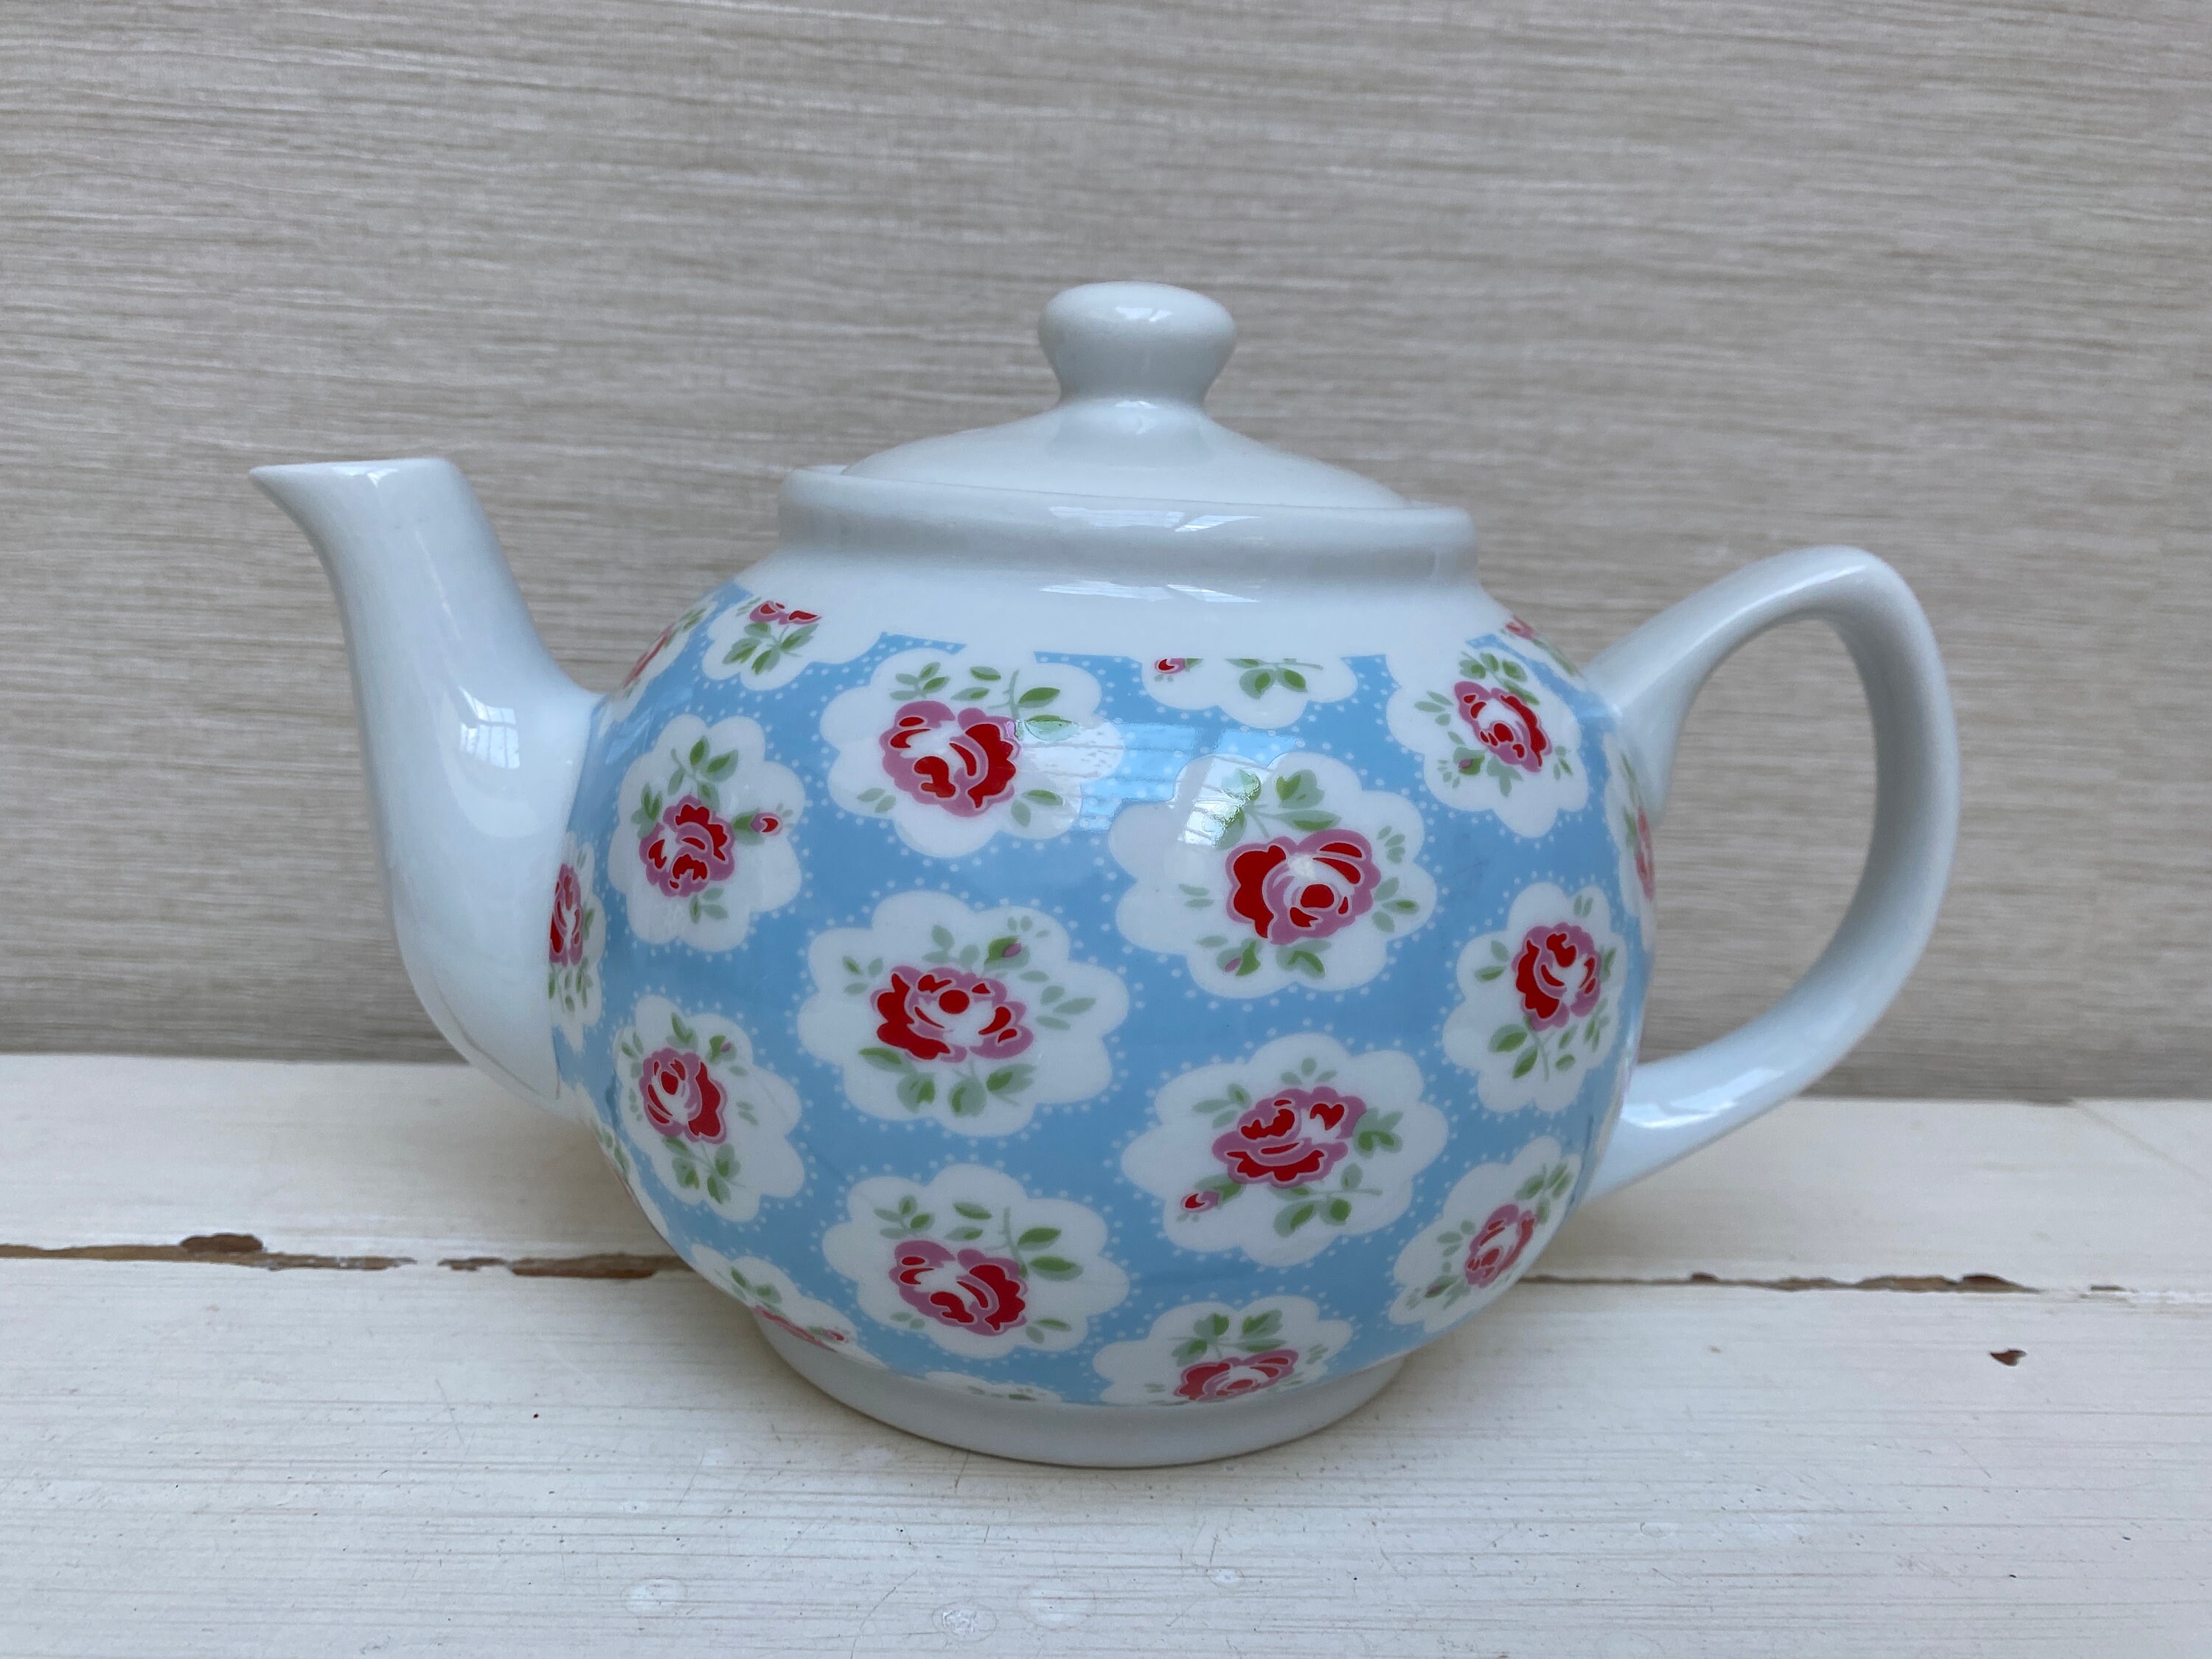 Very cute electric kettle not from Cath Kidston but similar in style.